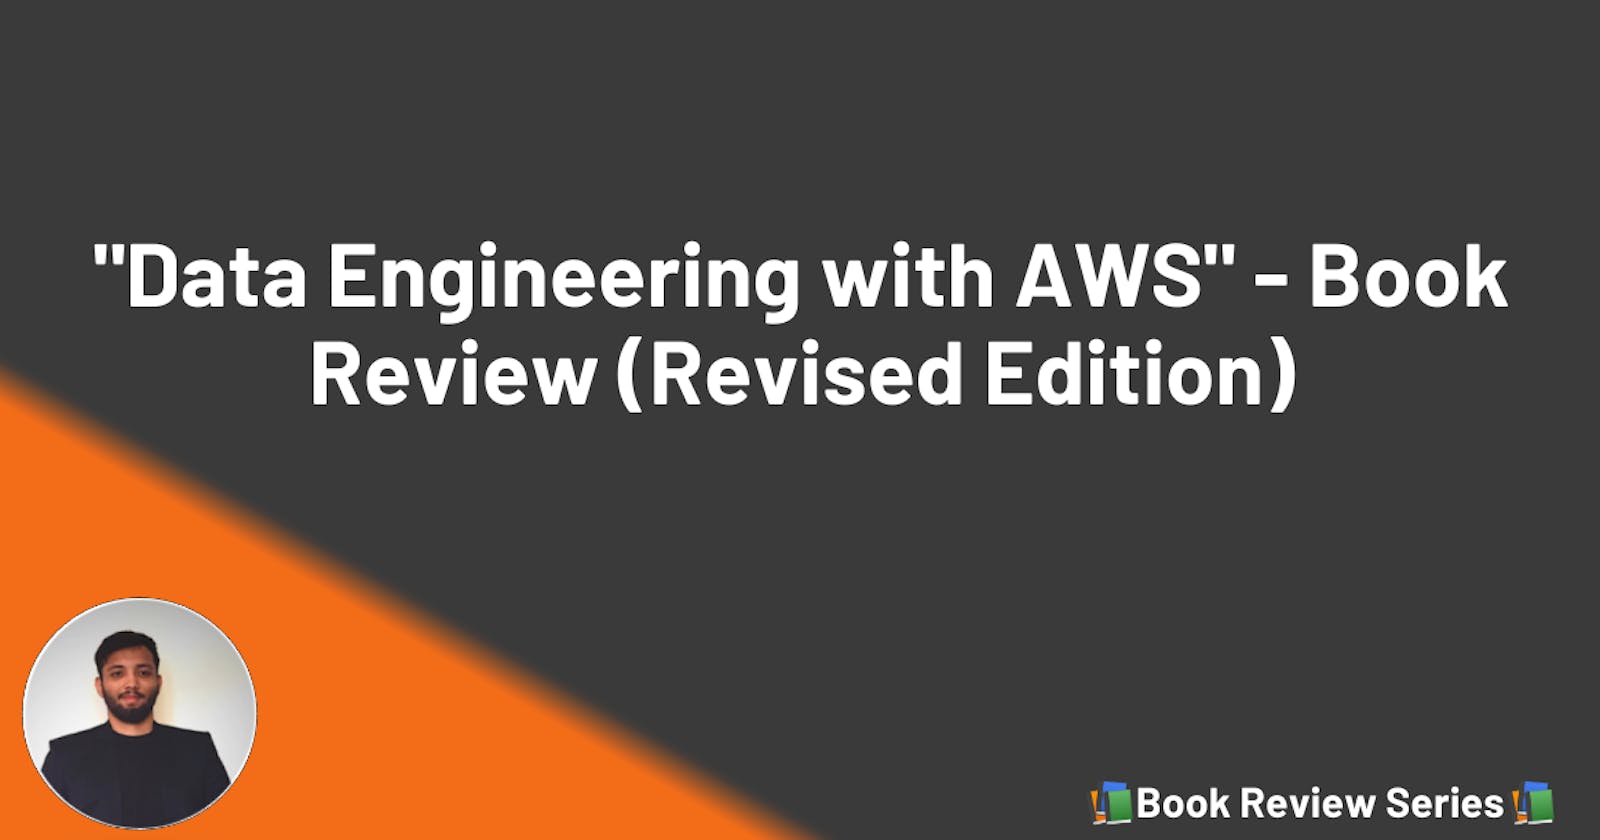 The revised edition of "Data Engineering with AWS" - Book Review